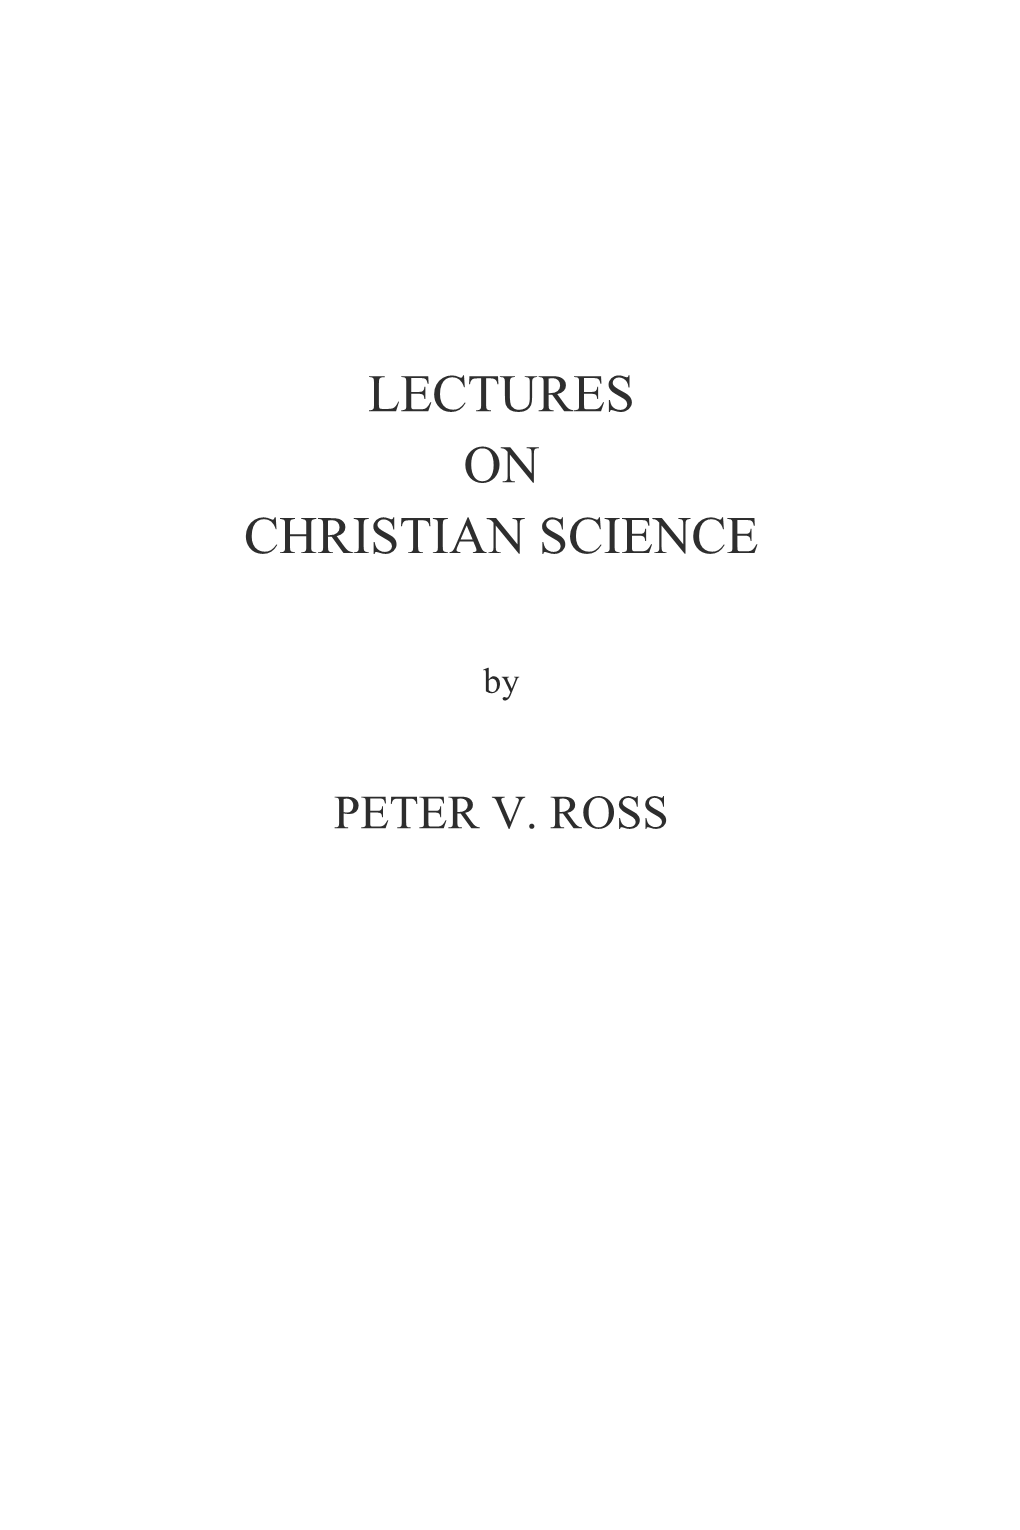 Lectures on Christian Science